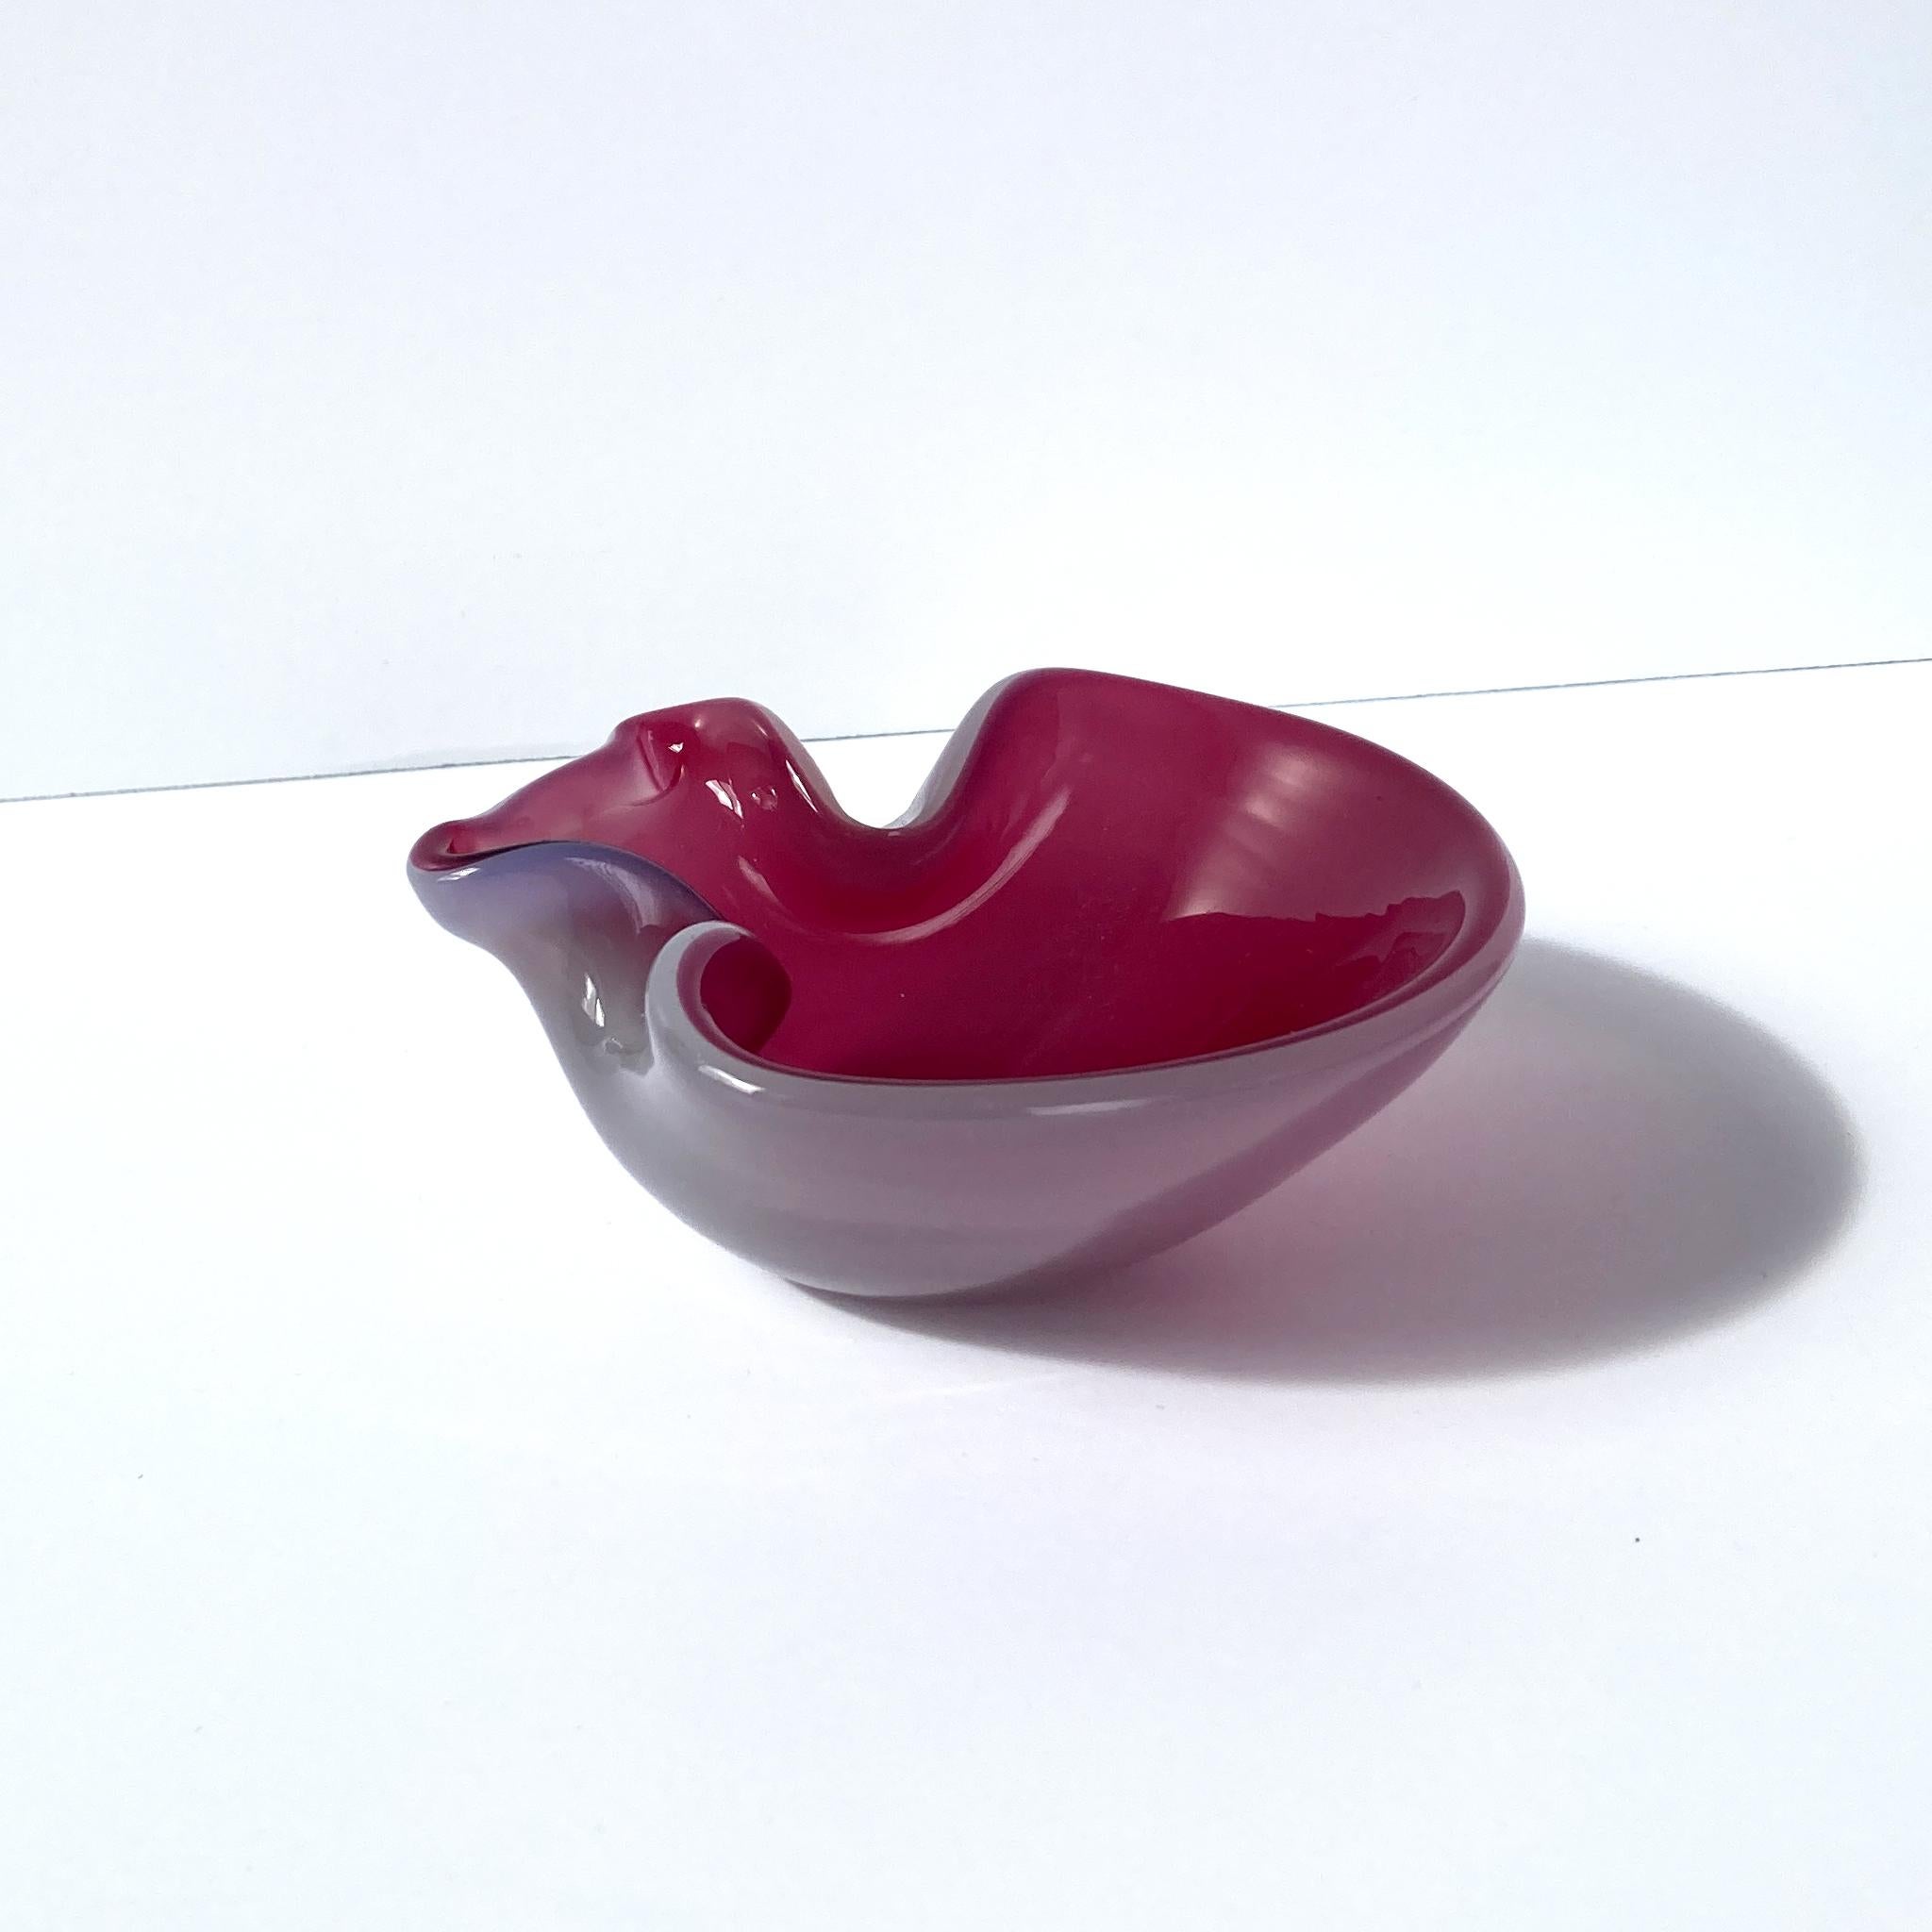 Stunning, unique Venetian hand blown art glass vide poche. Beautiful cranberry pink interior with light pink opal exterior, creating a luminous mauve shade. The glass glitters when the light hits this piece at different angles. Abstract shape lends